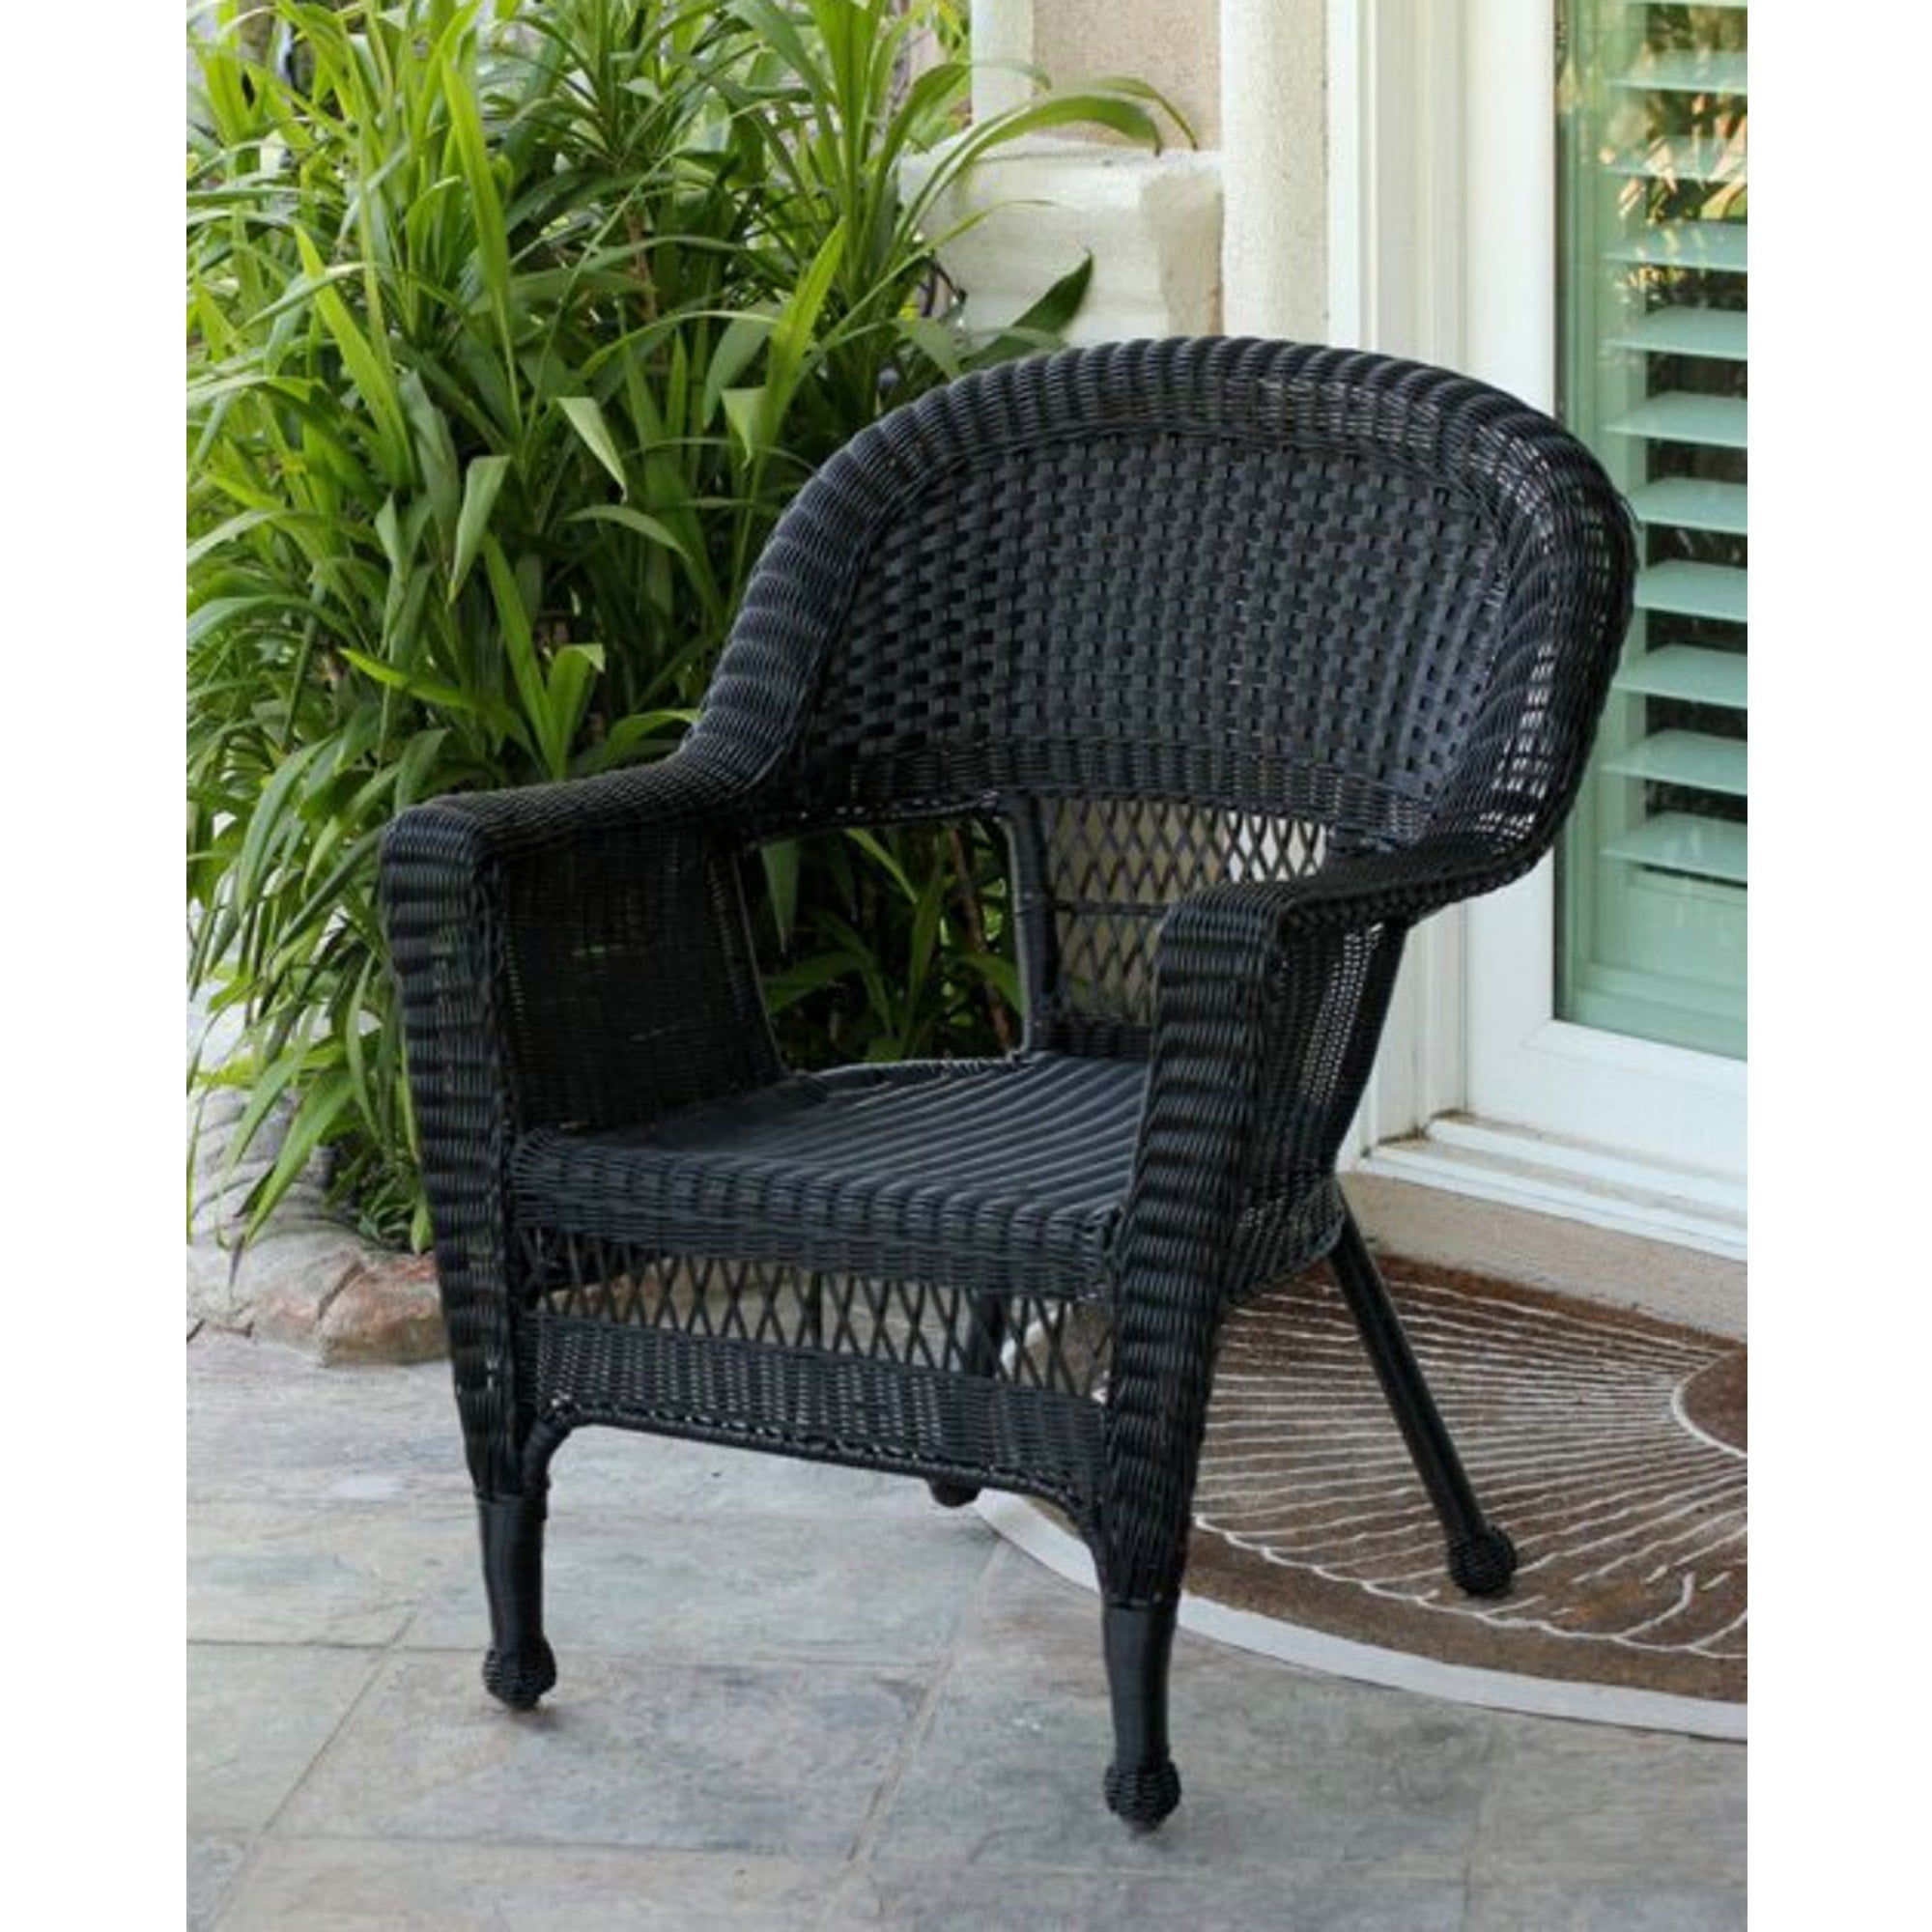 Durable And Weather resistant Outdoor Furniture